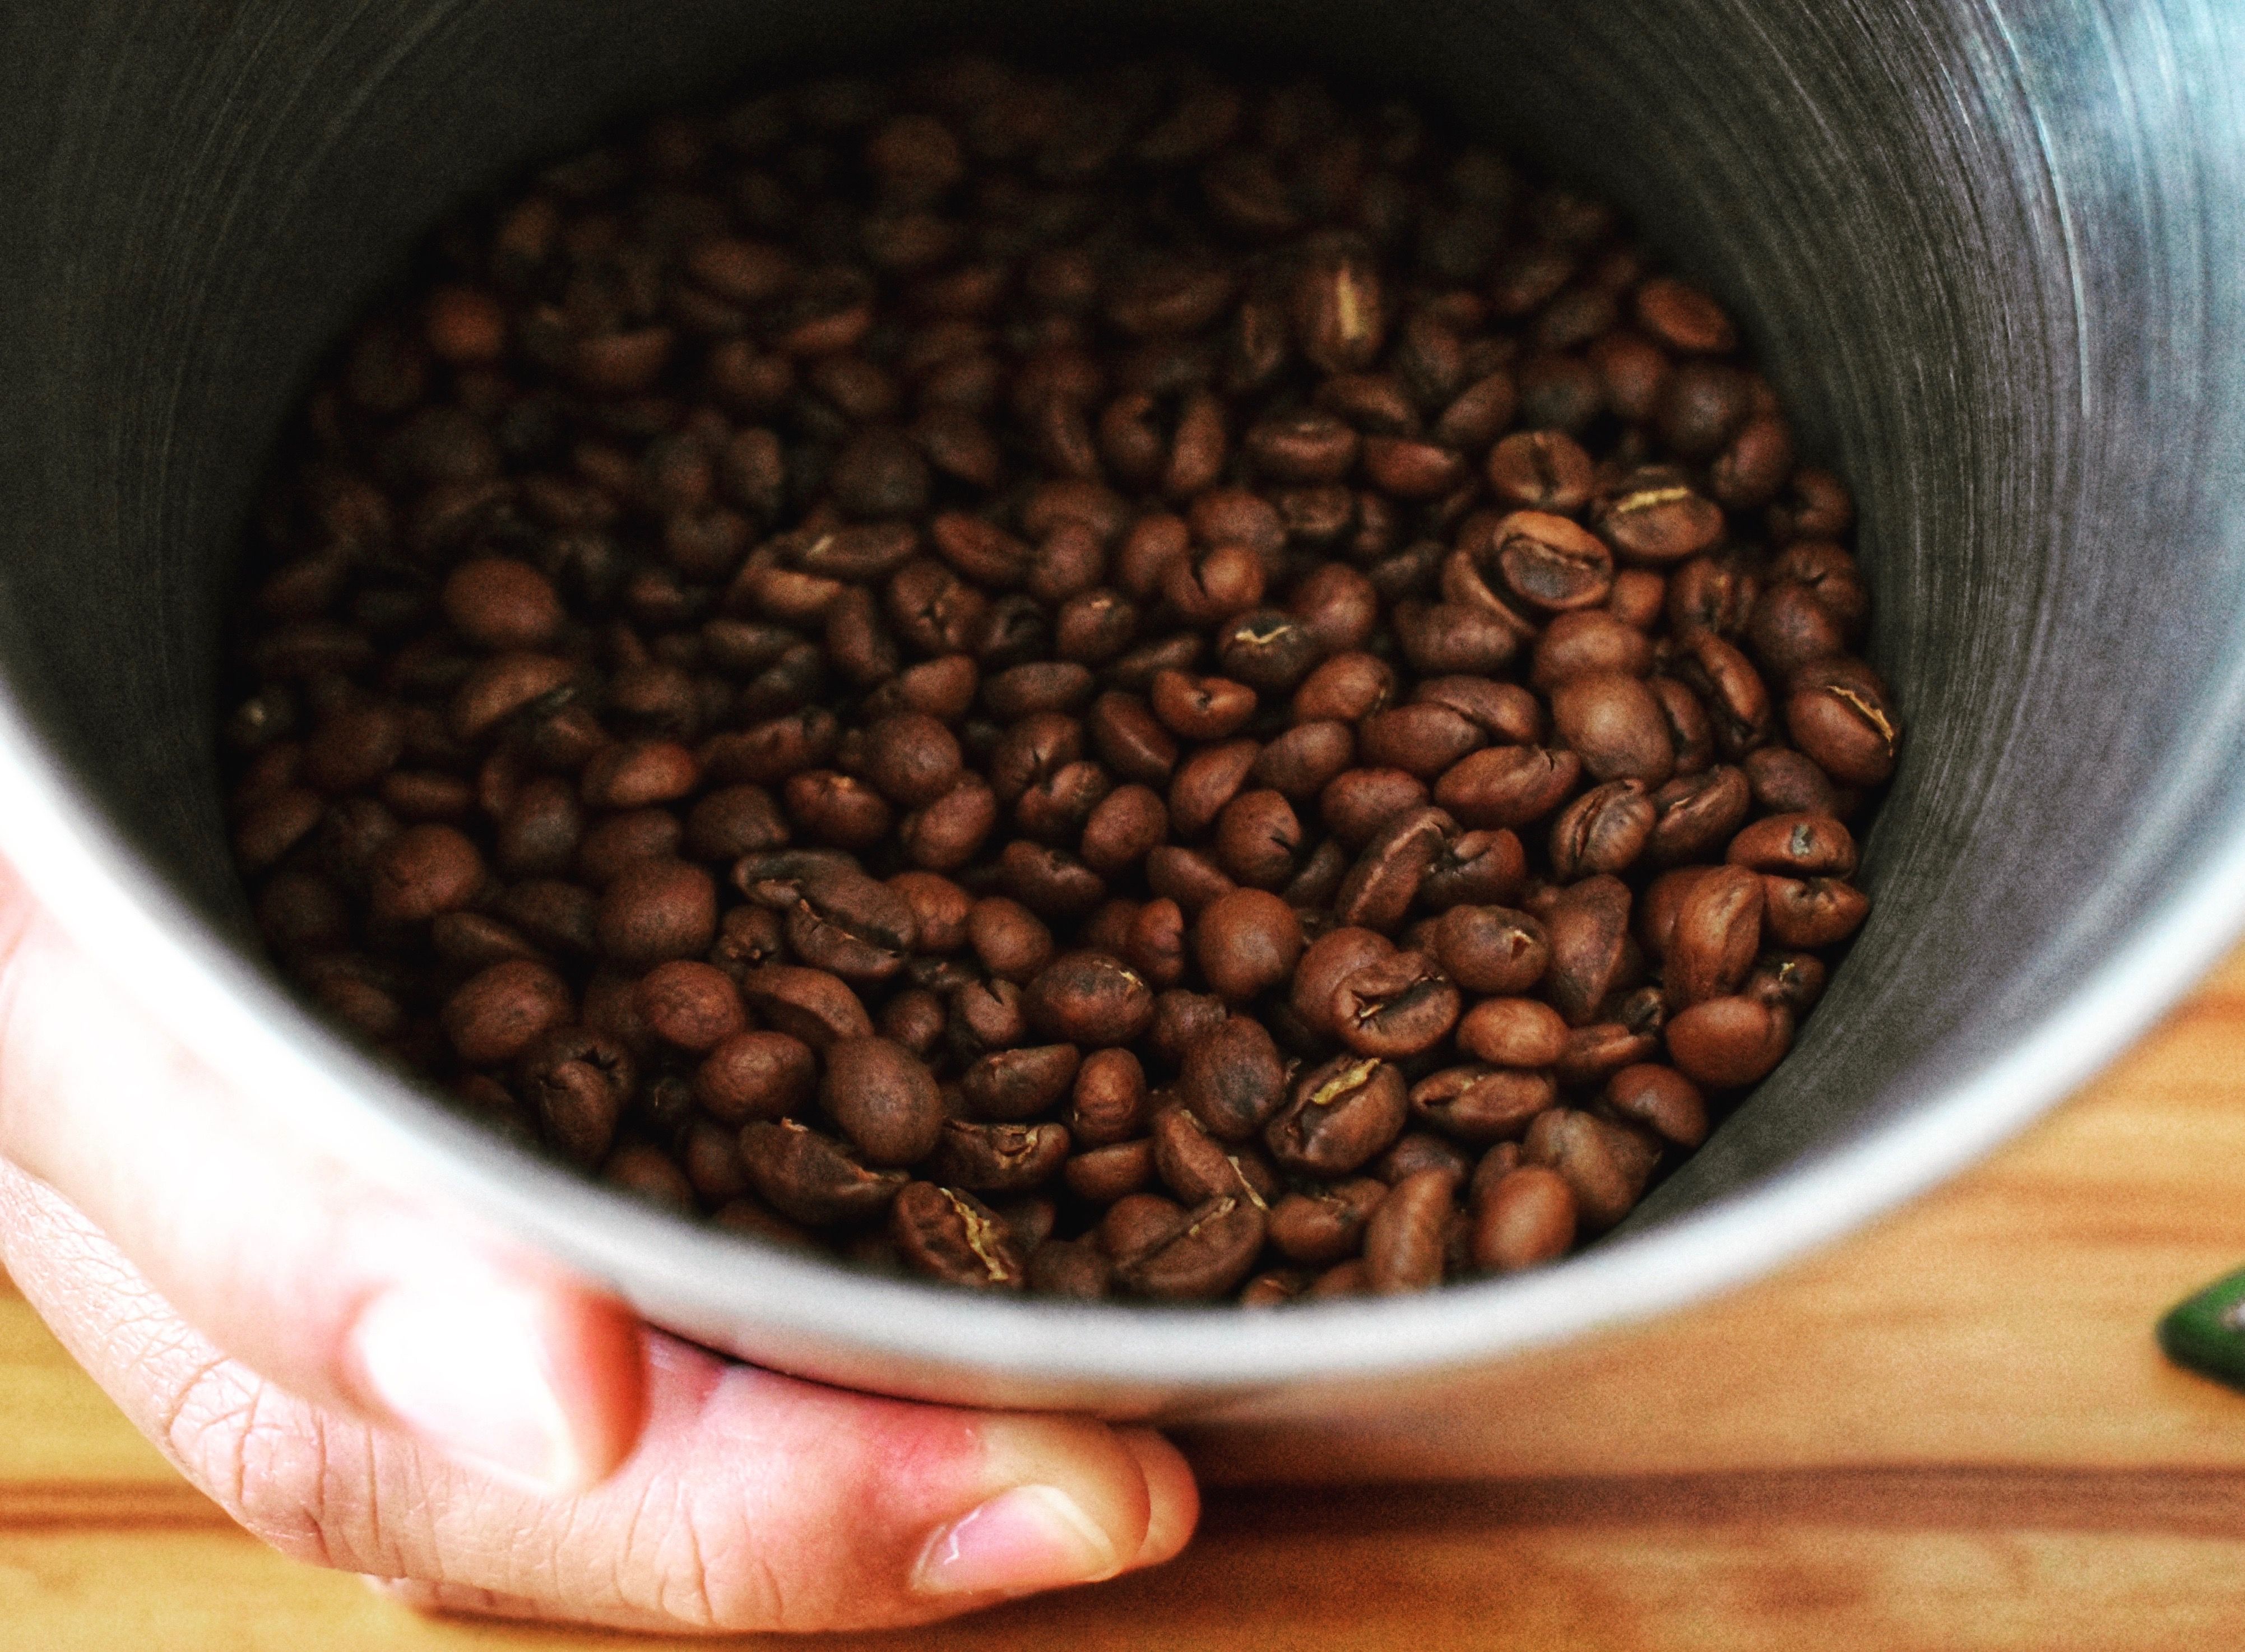 Roasted beans give off a unique aroma. Image by Samira Tella. Costa Rica, 2018.